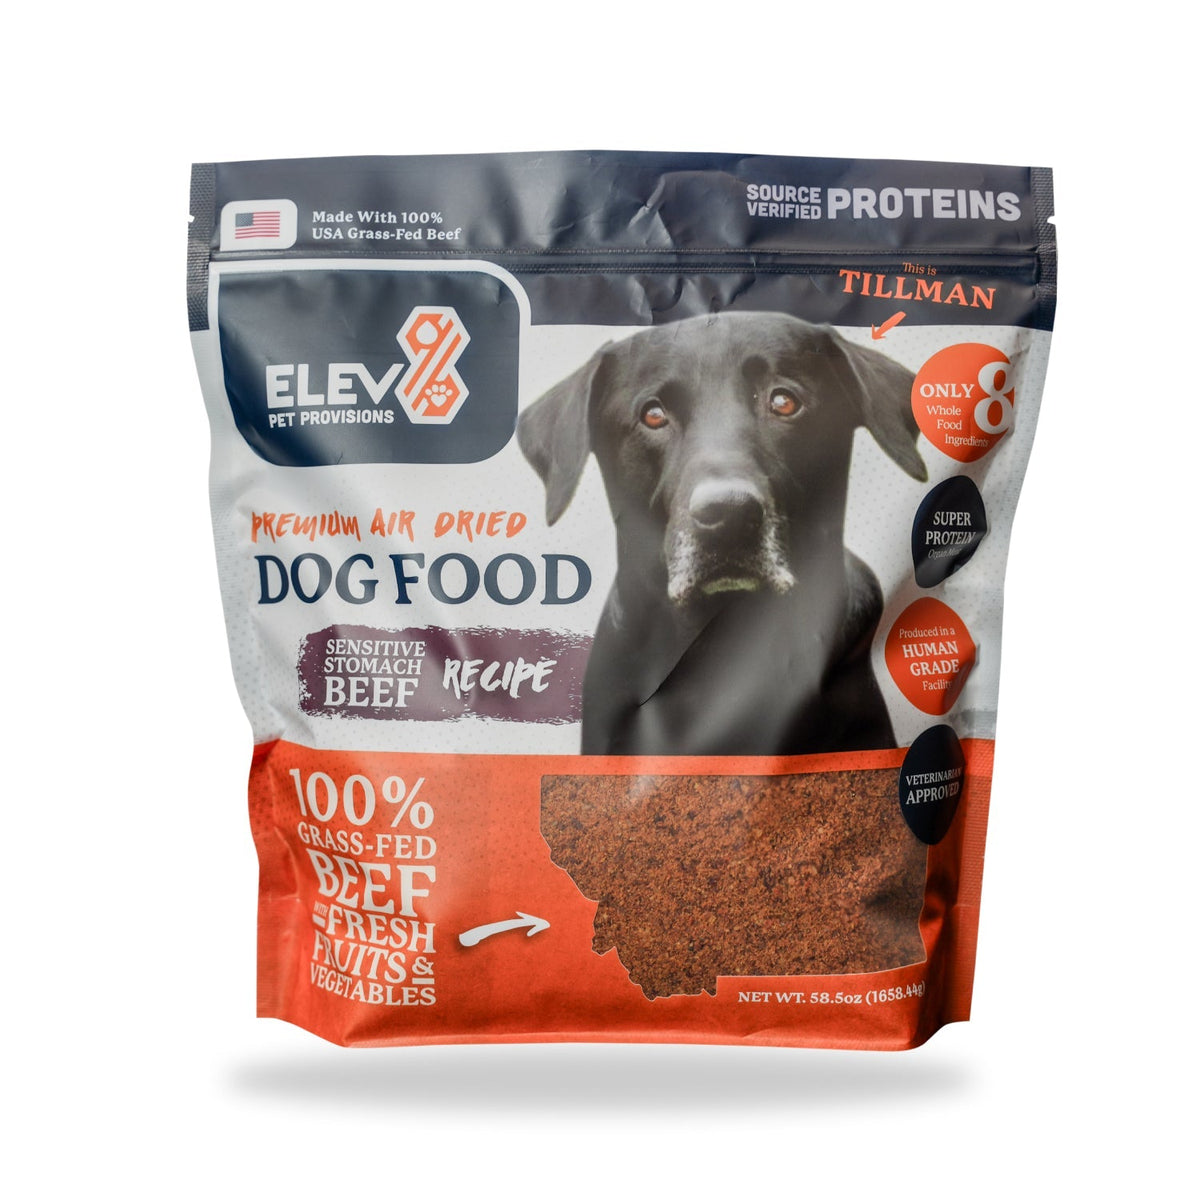 Sensitive Stomach Beef Recipe Dog Food - 4 Bags